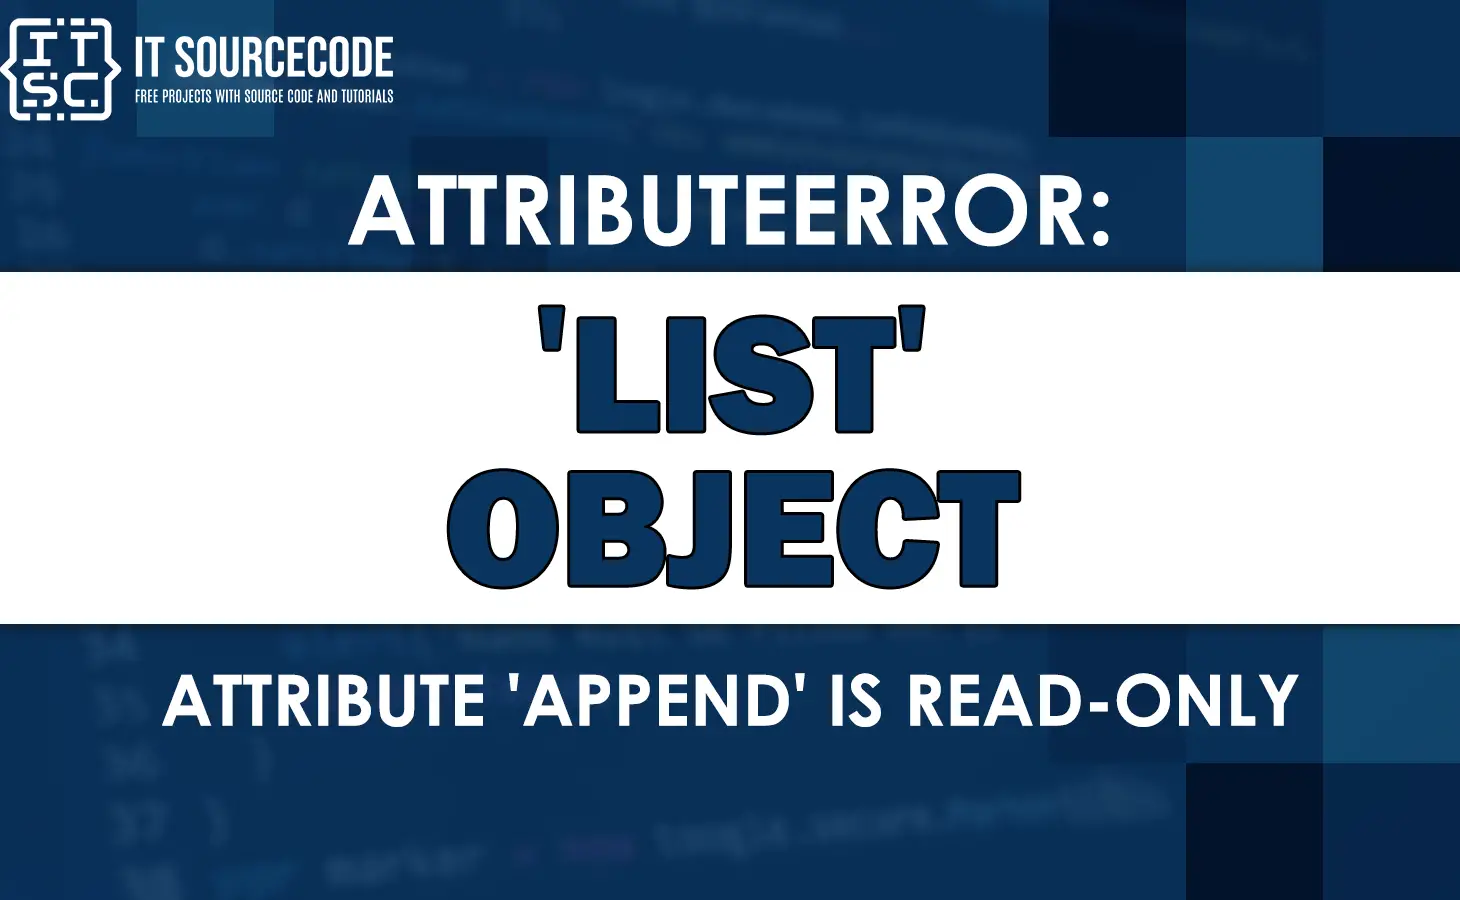 Attributeerror: list object attribute append is read-only